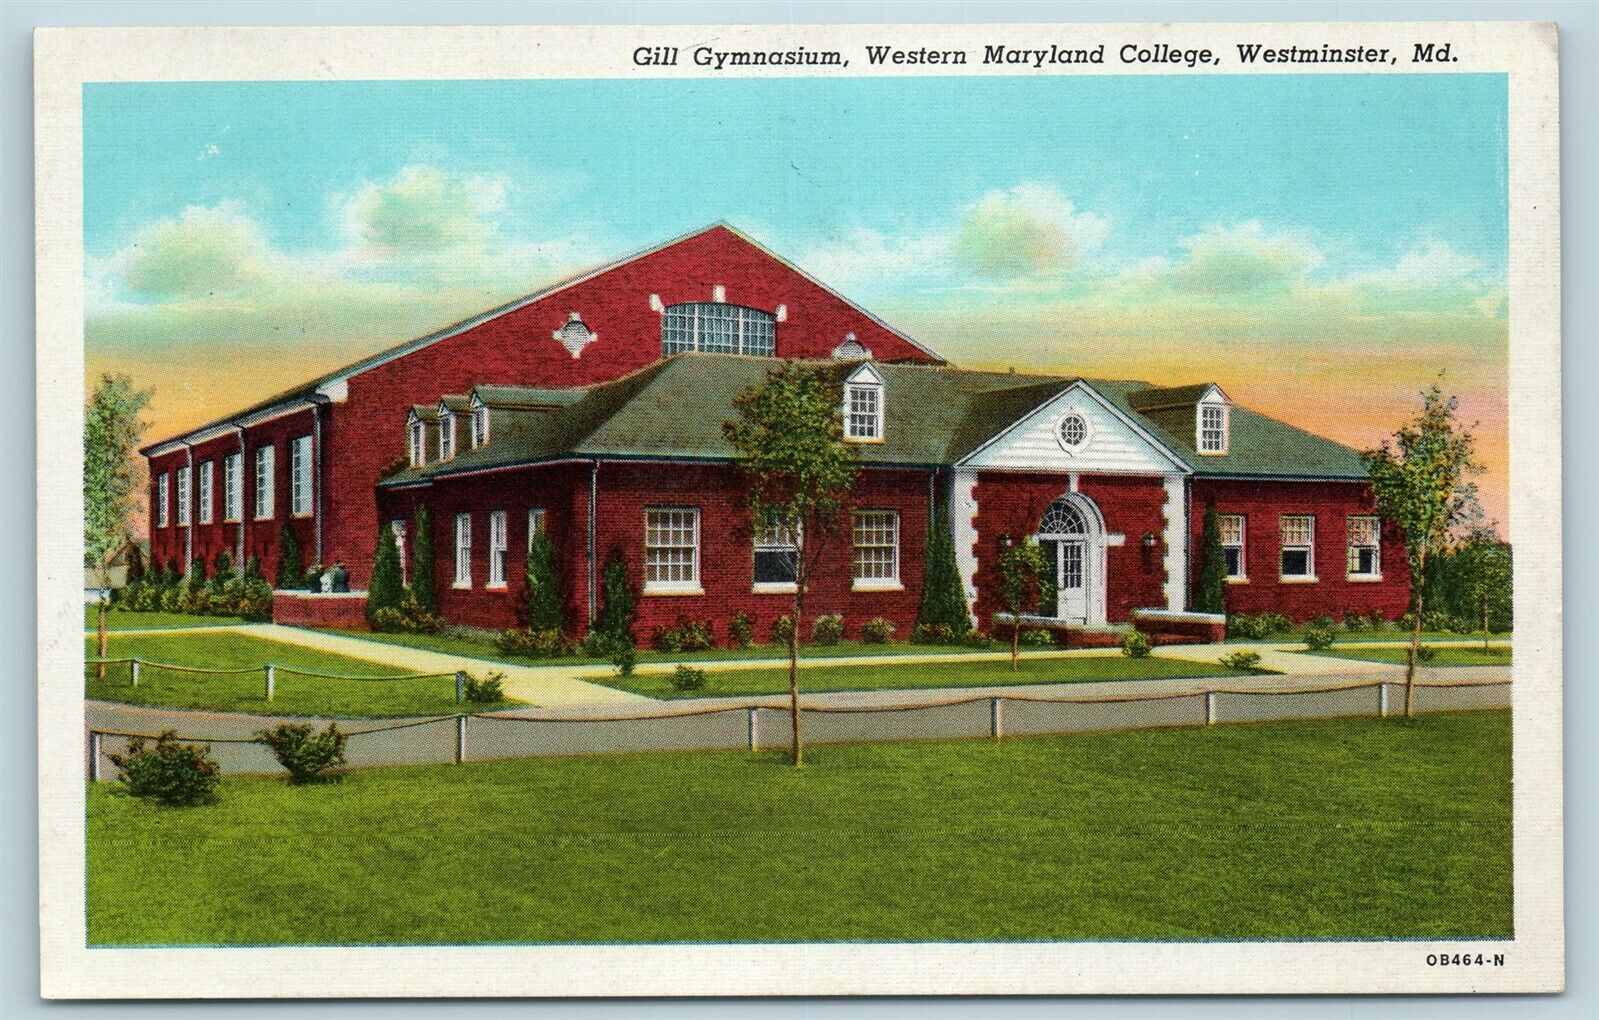 Postcard MD Westminster Western Maryland College Gill Gymnasium c1940s X10